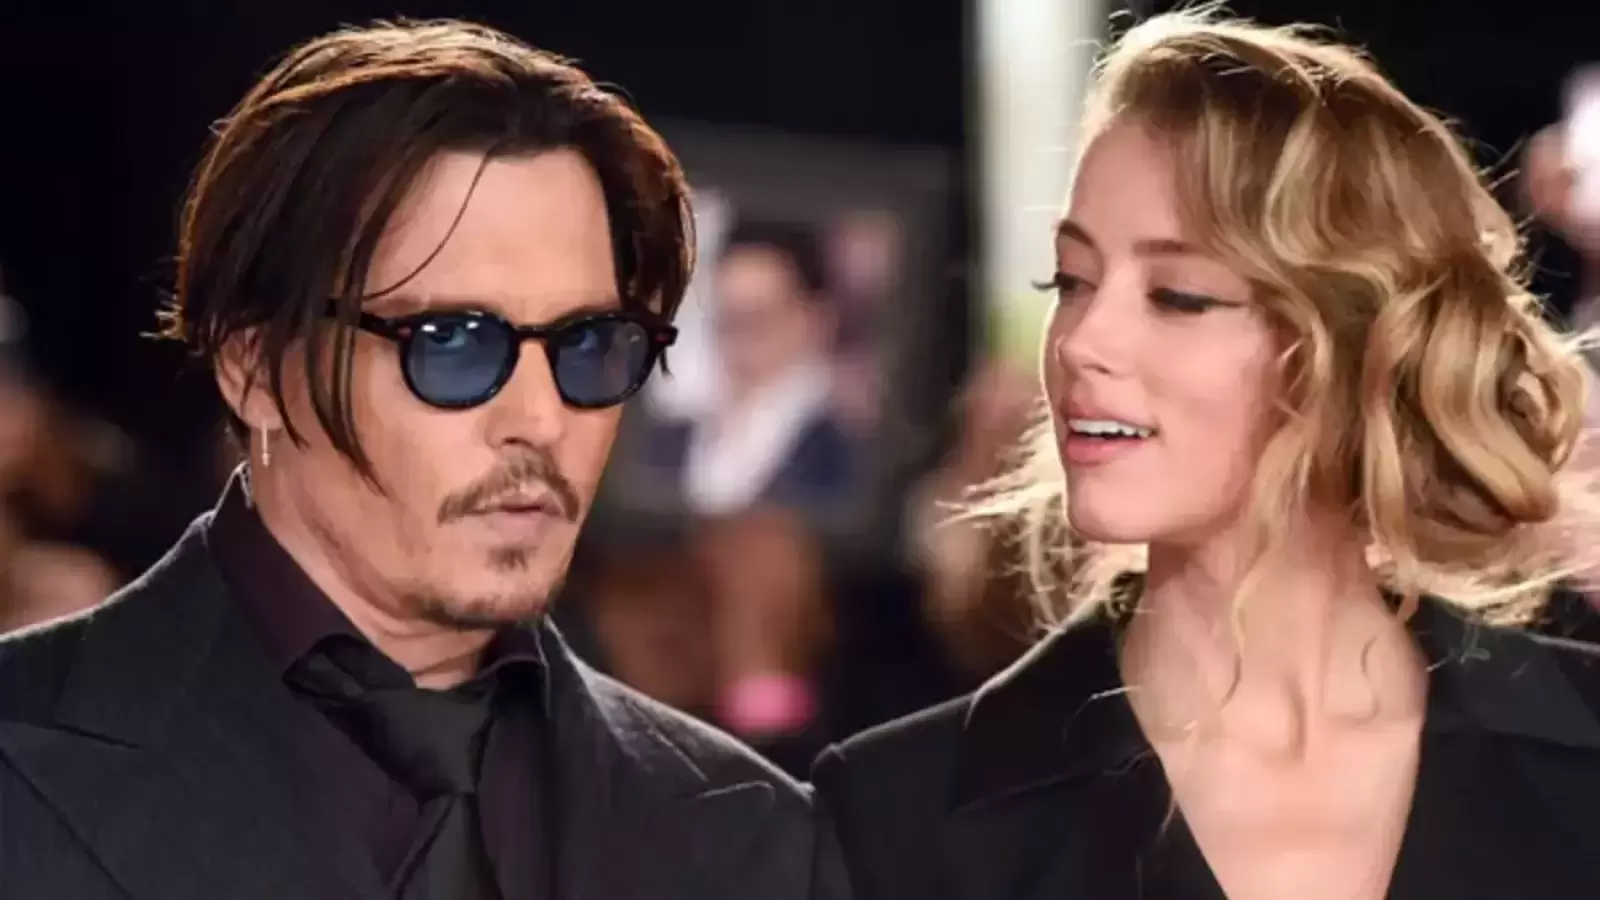 Mansion where Johnny Depp severed his finger is up for grabs for million | Hollywood